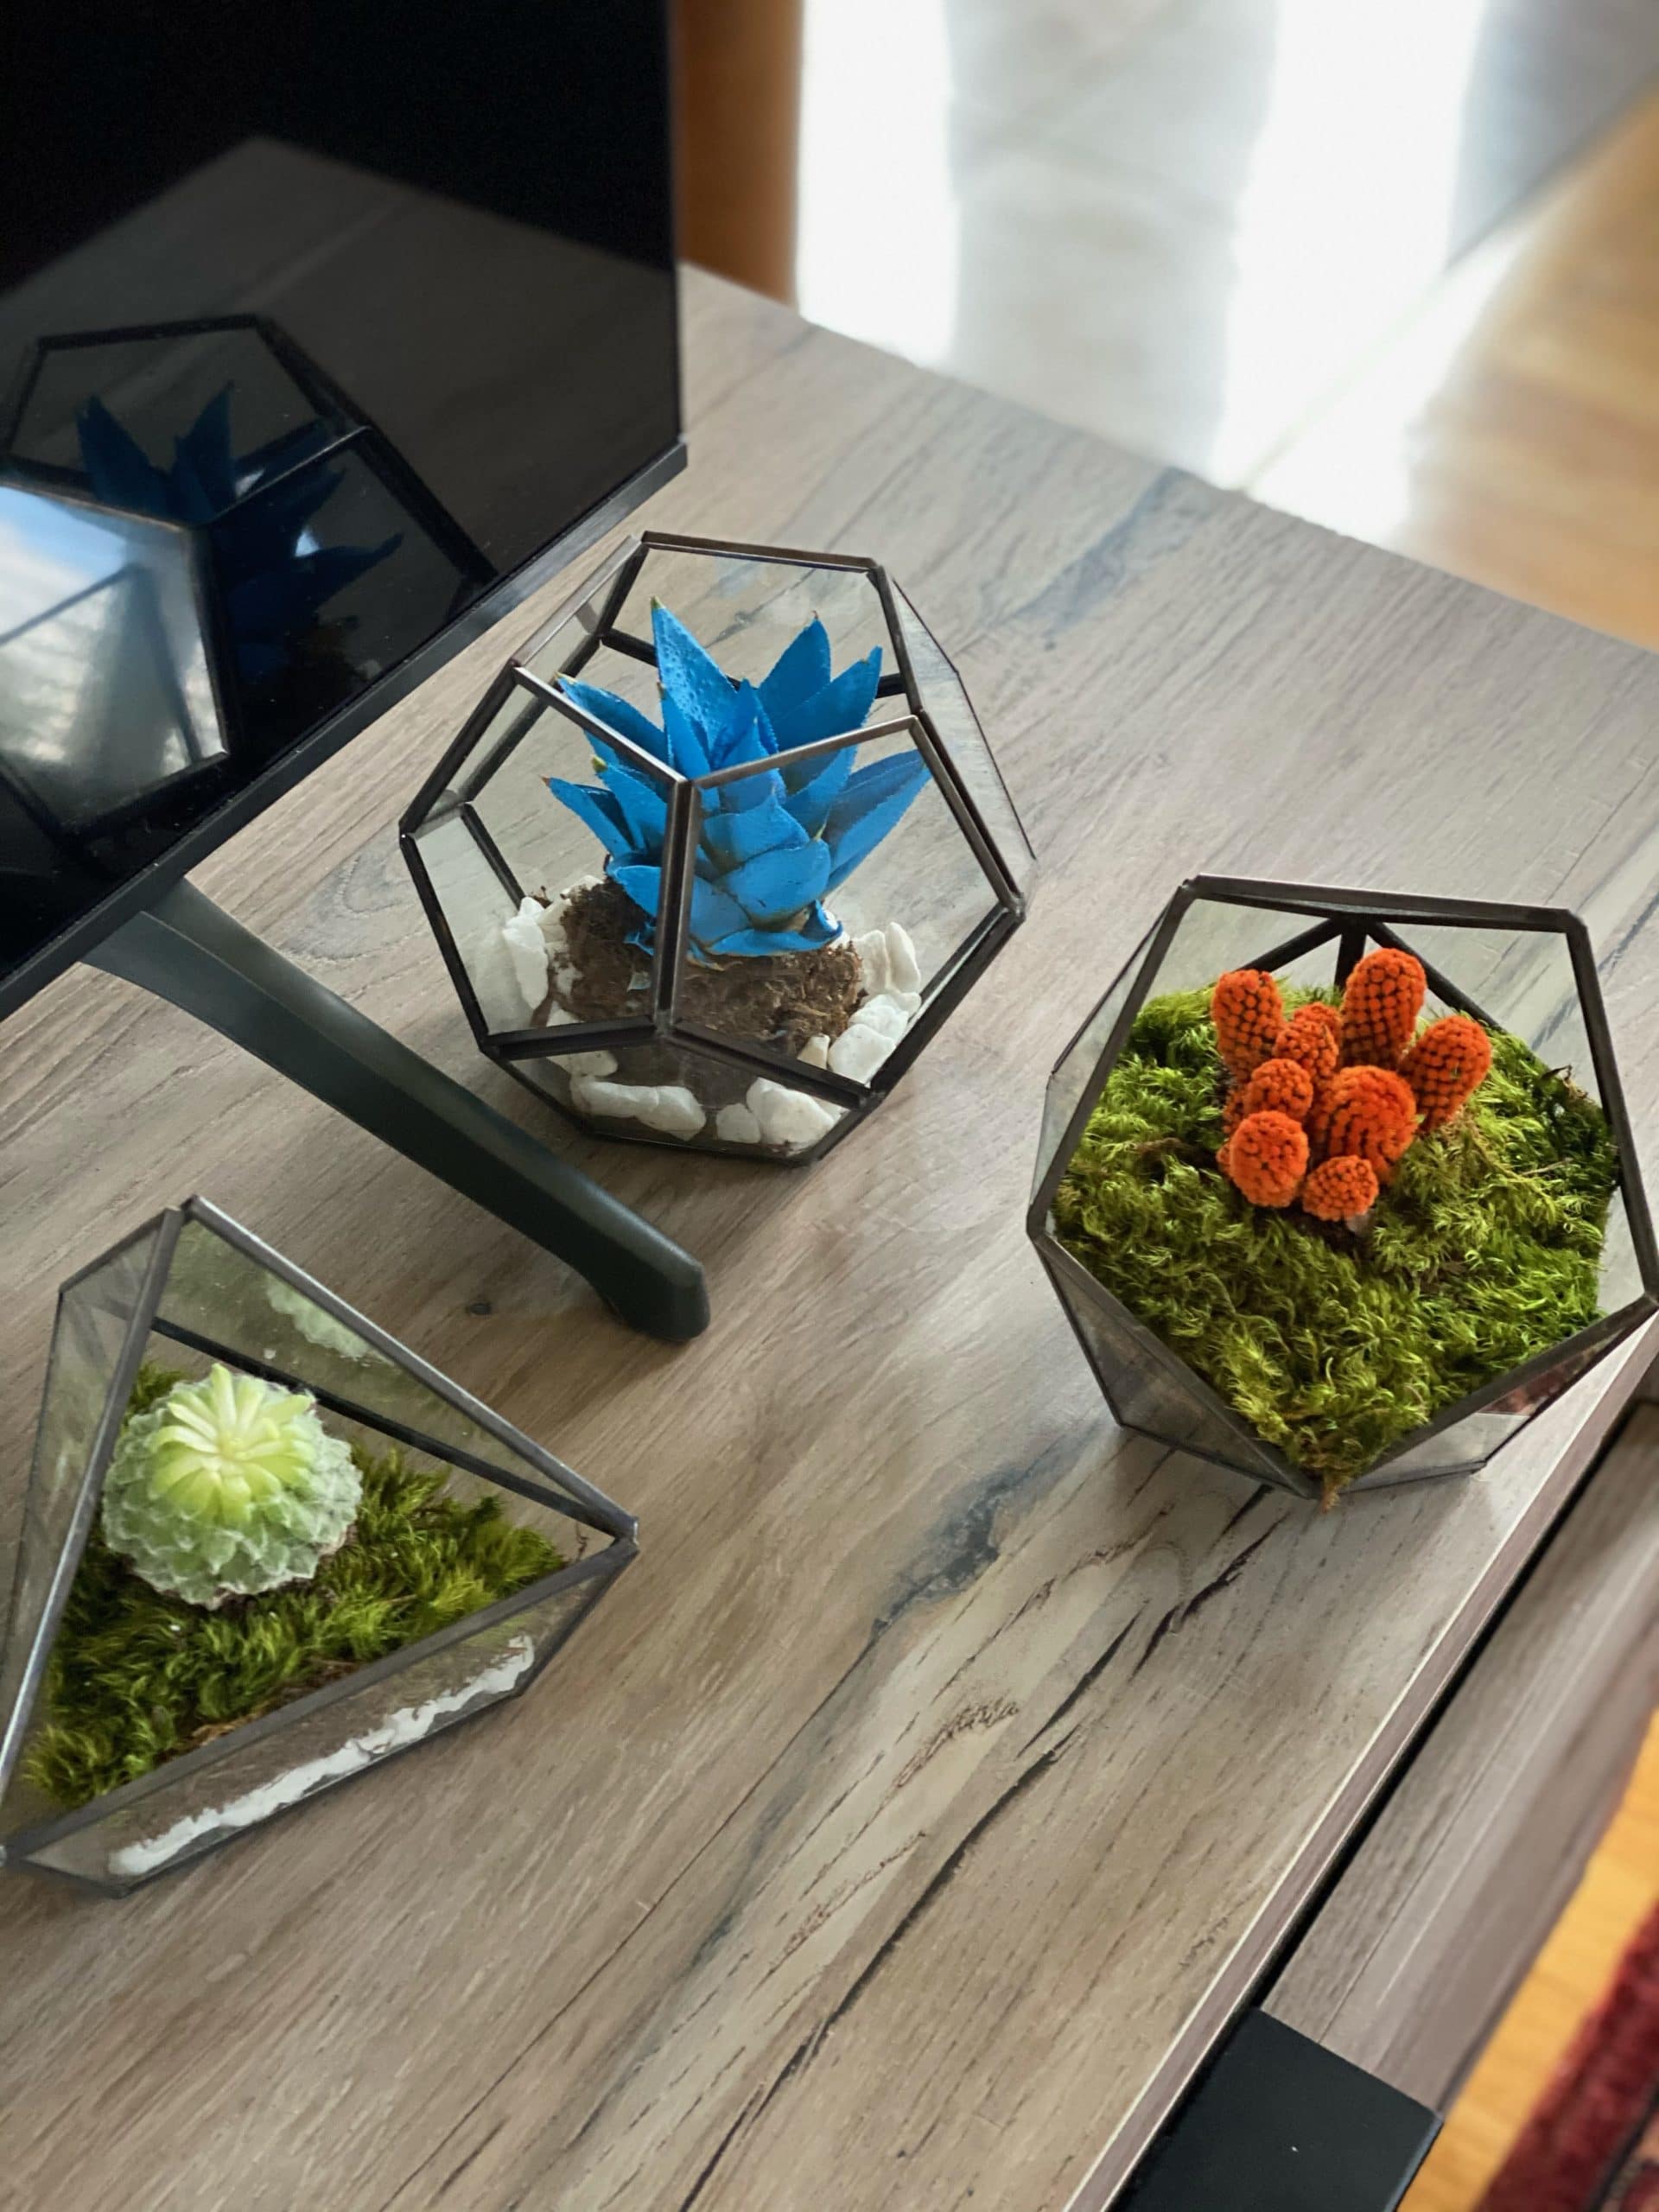 Moss terrarium and moss decor for your home. Living moss terrarium in a living room. Living moss wall decor that improves air quality and provides therapeutic relief from stress and anxiety. Moss decor home.